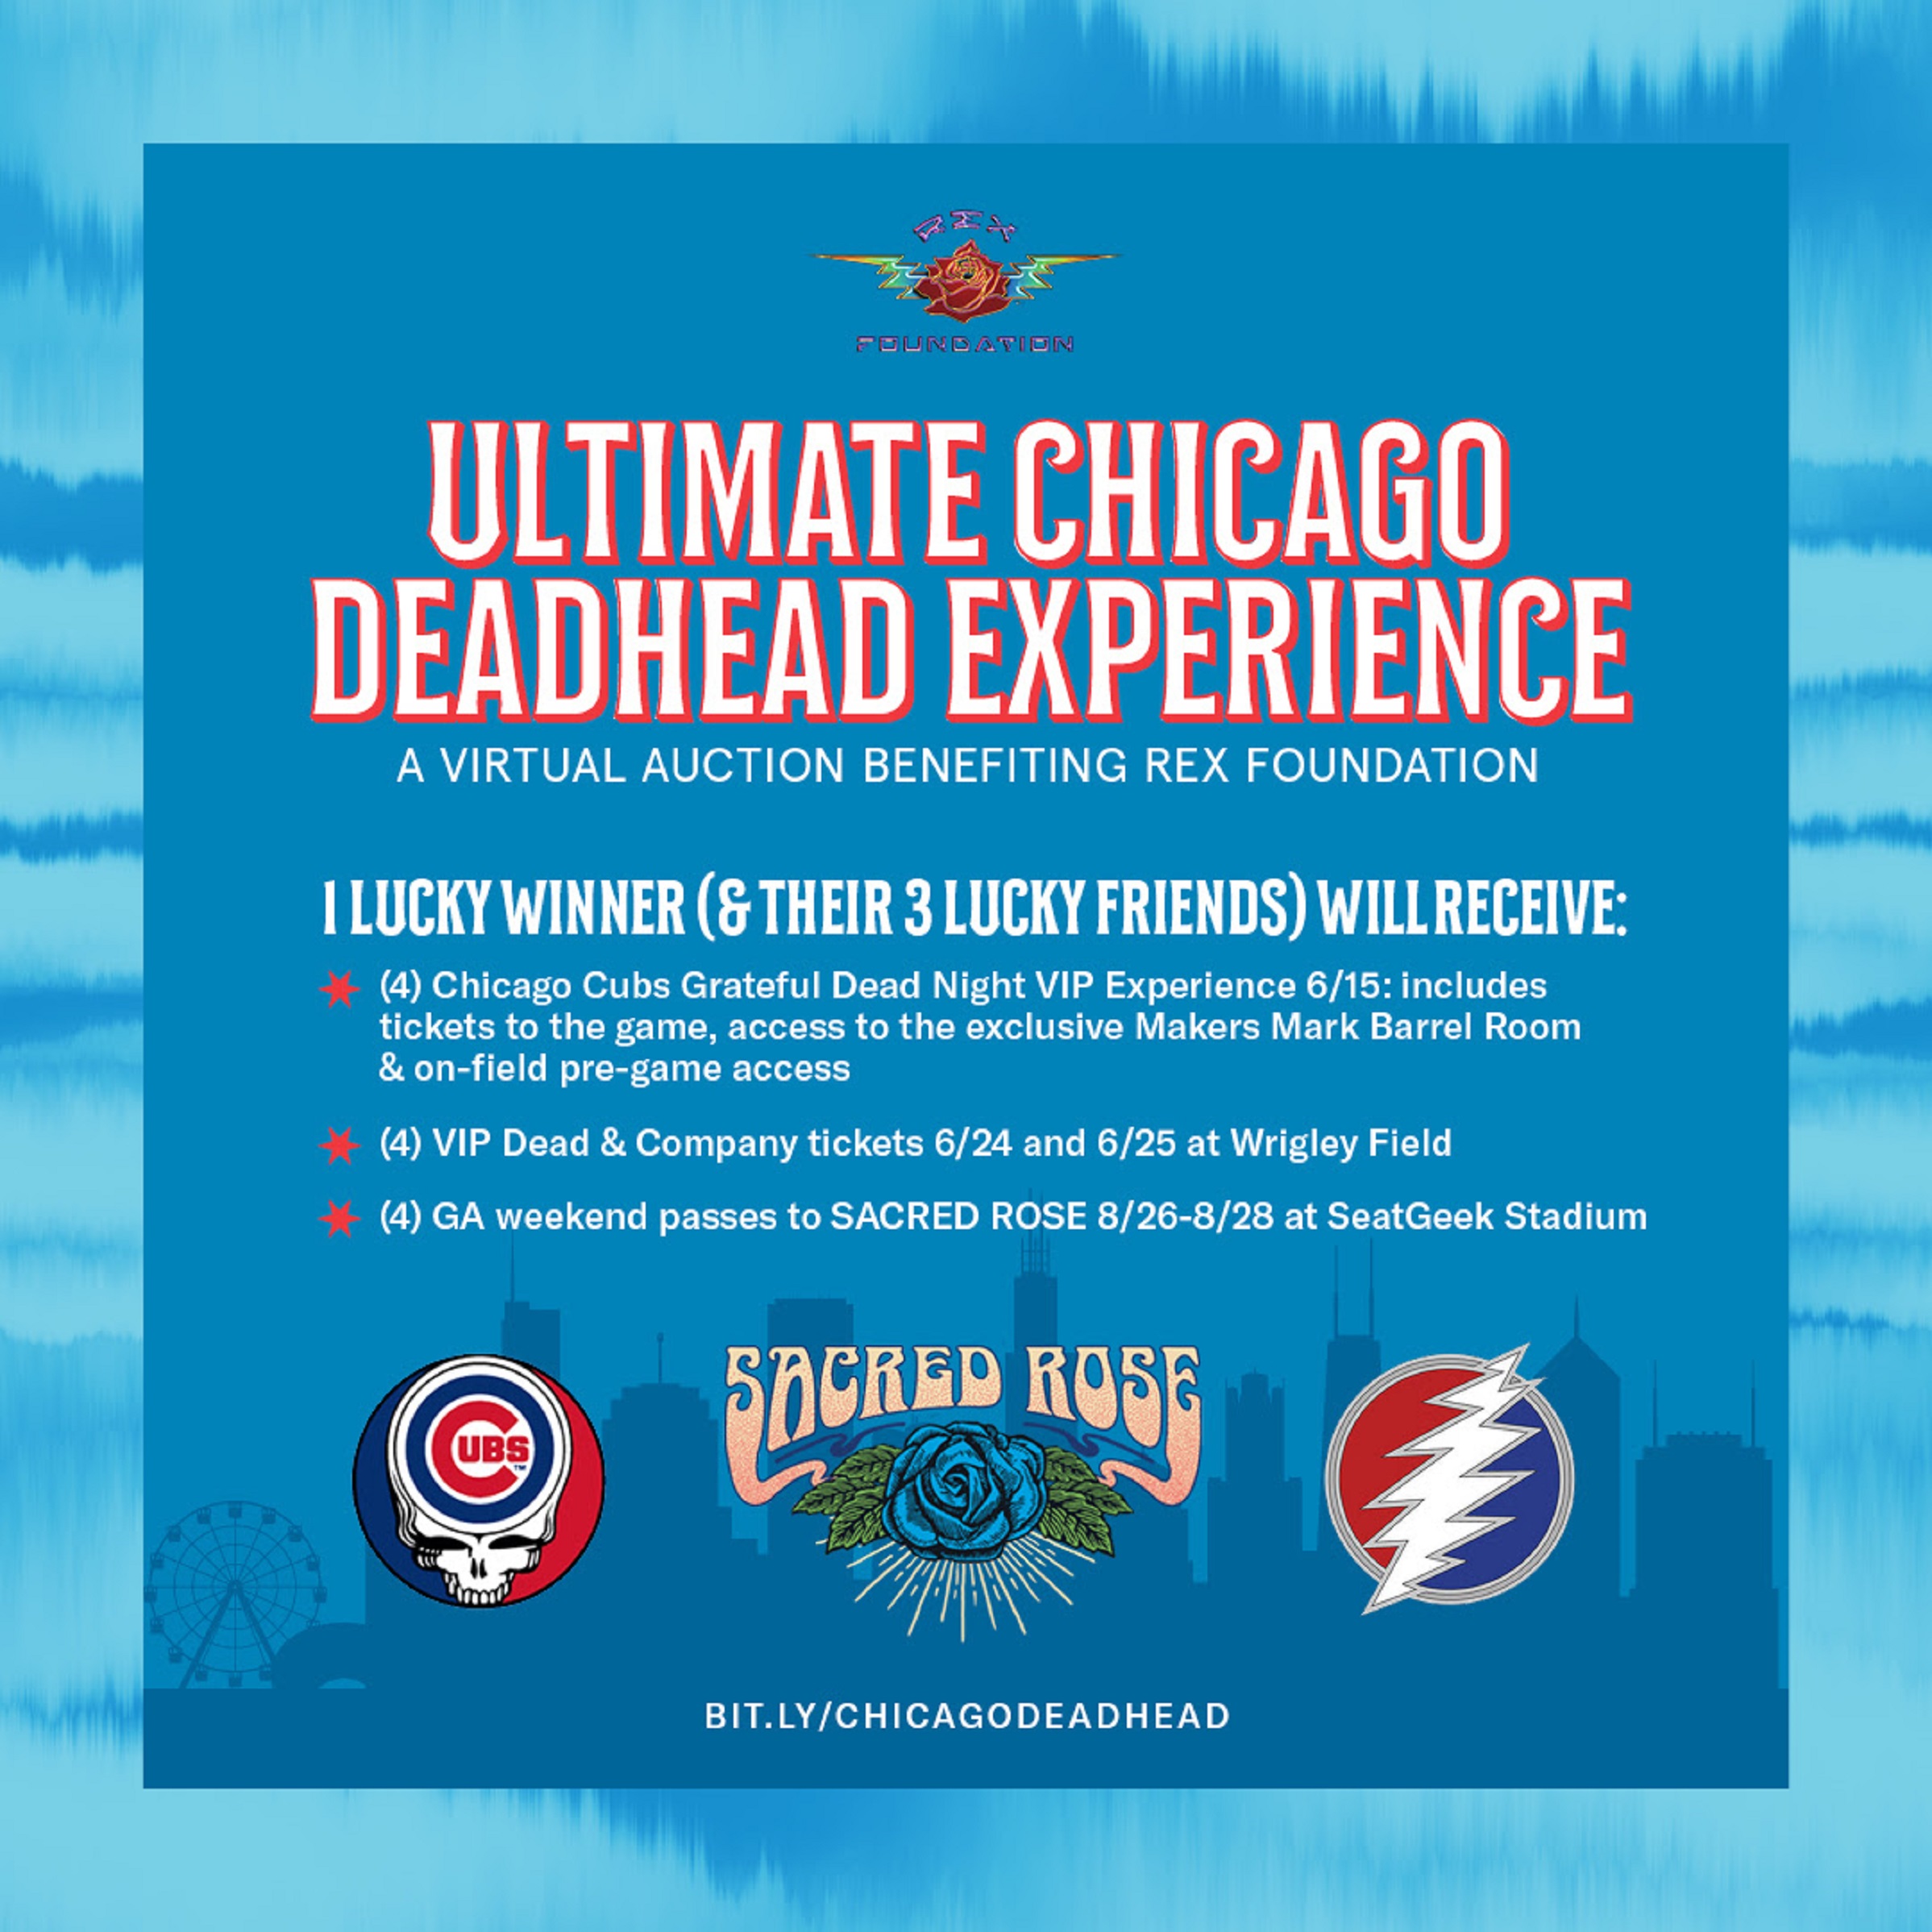 CHICAGO! Introducing...the Ultimate Chicago Deadhead Experience